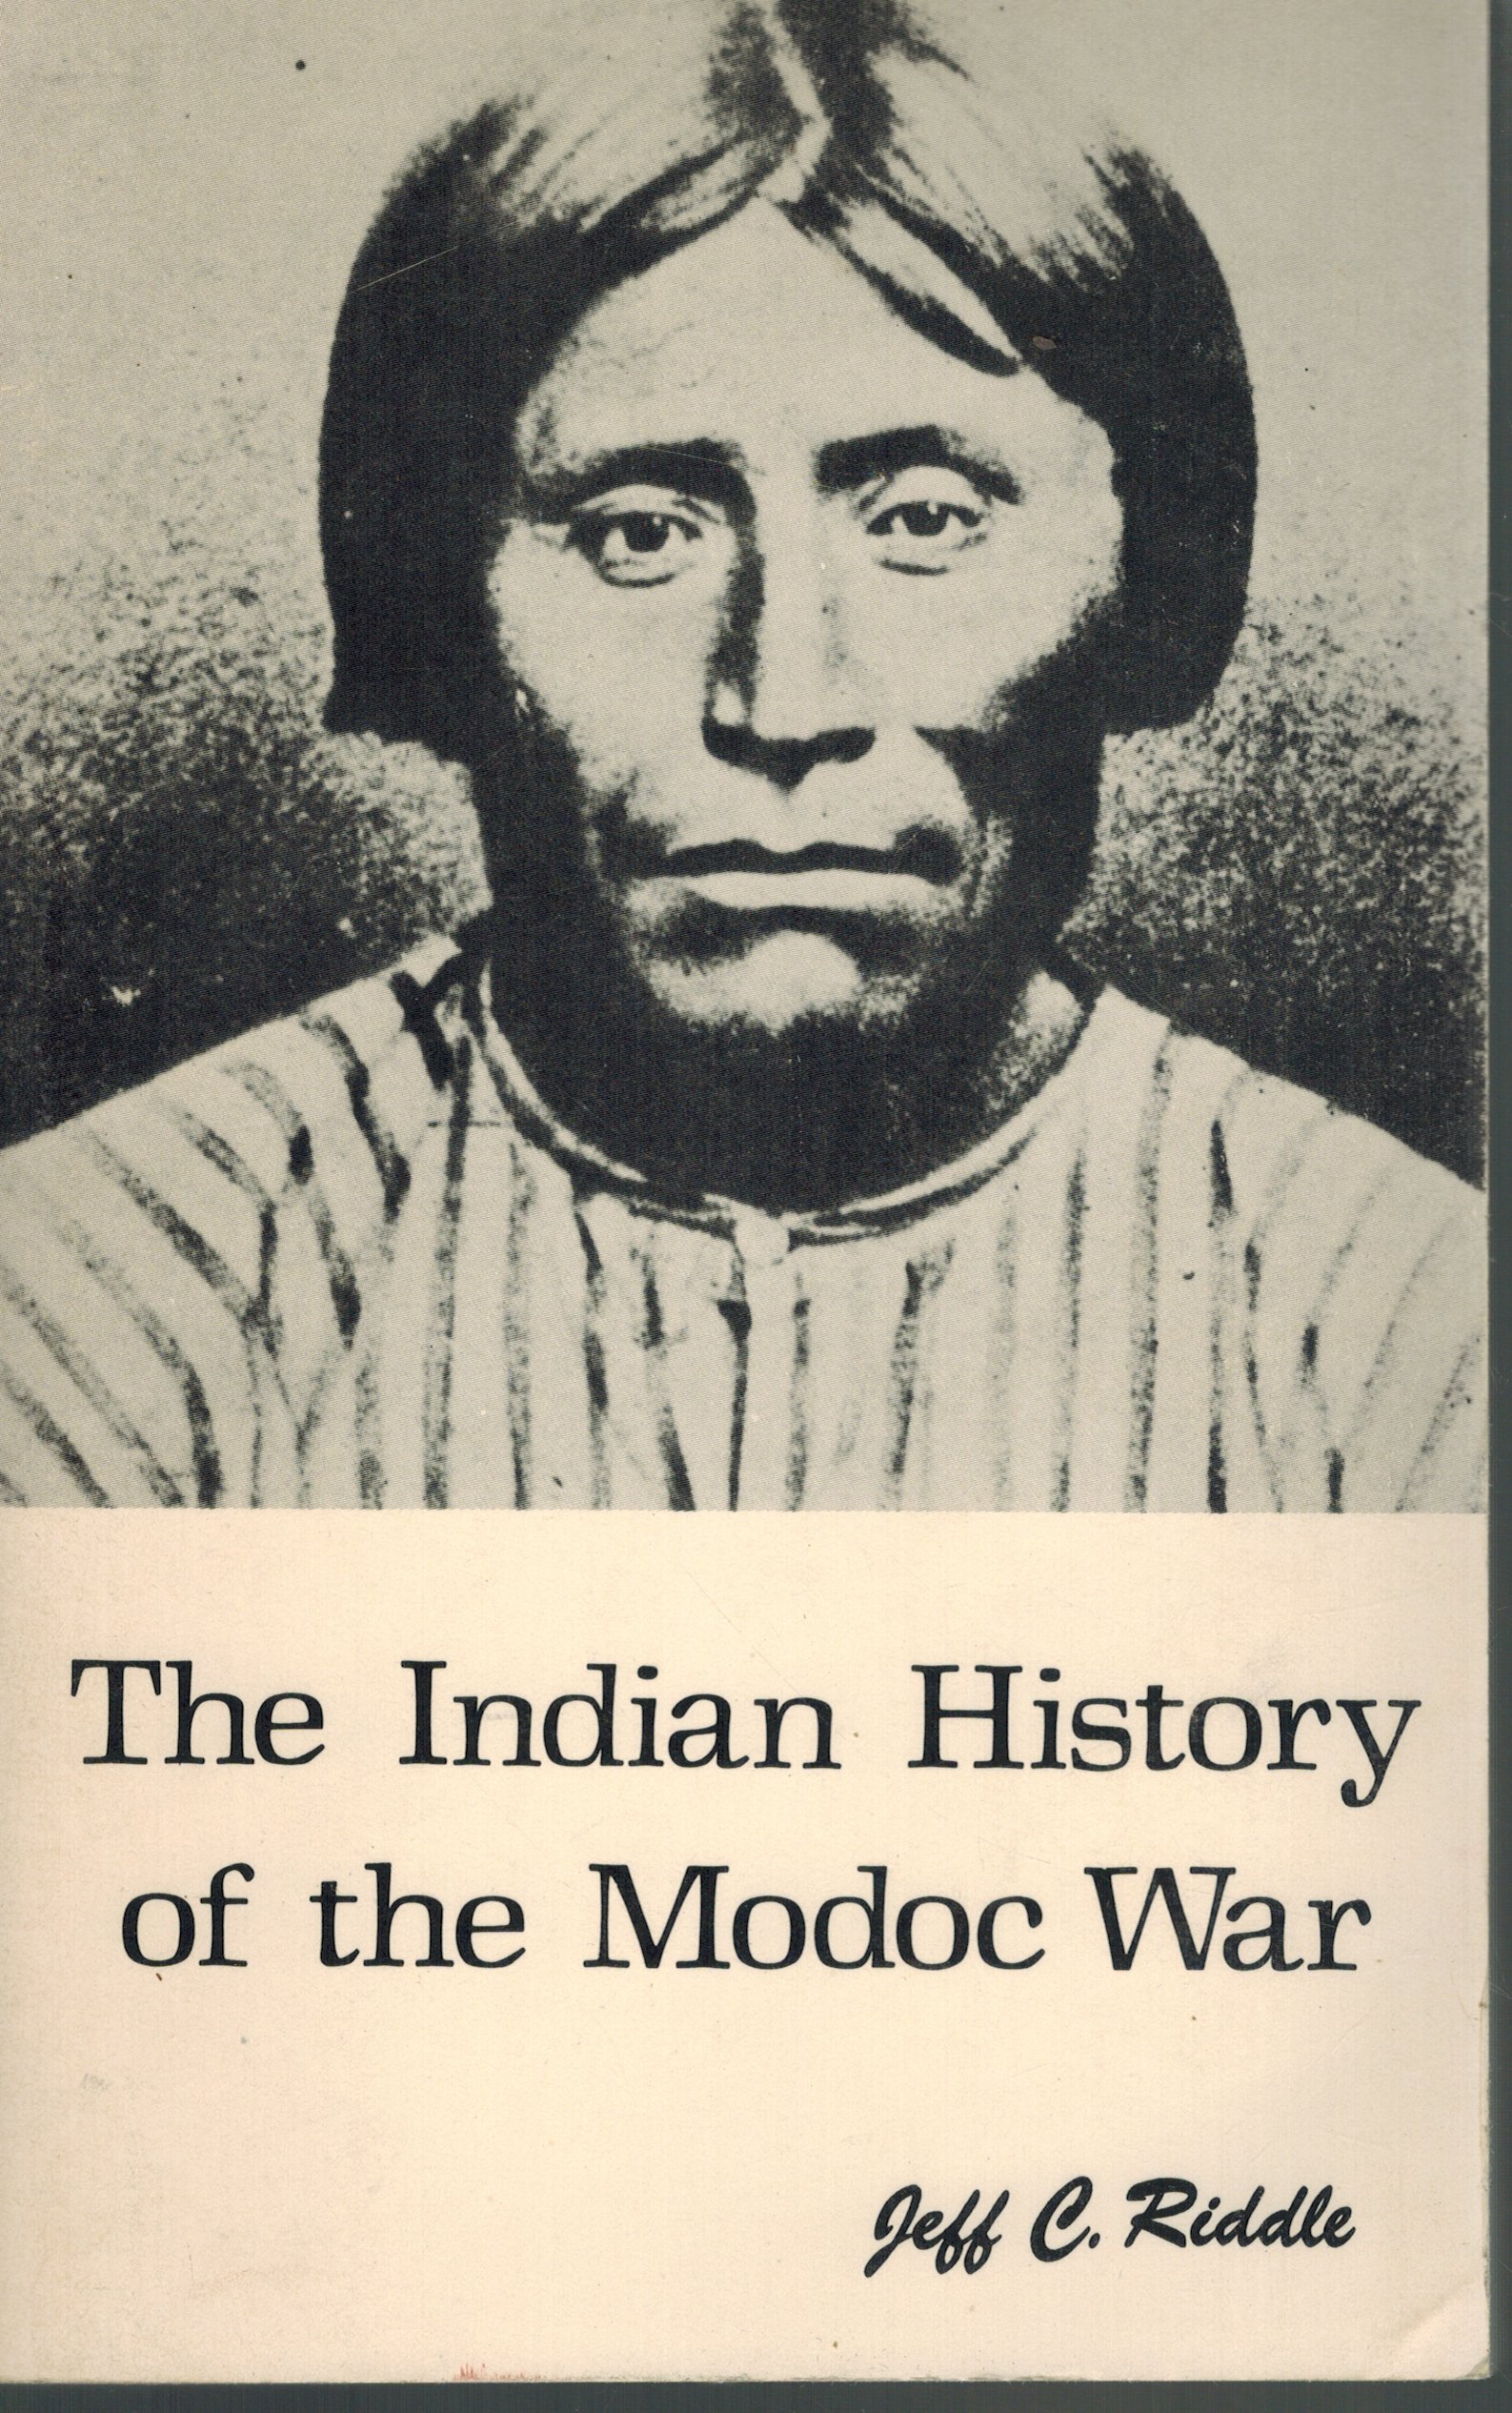 INDIAN HISTORY OF THE MODOC WAR - Riddle, Jeff C. Davis